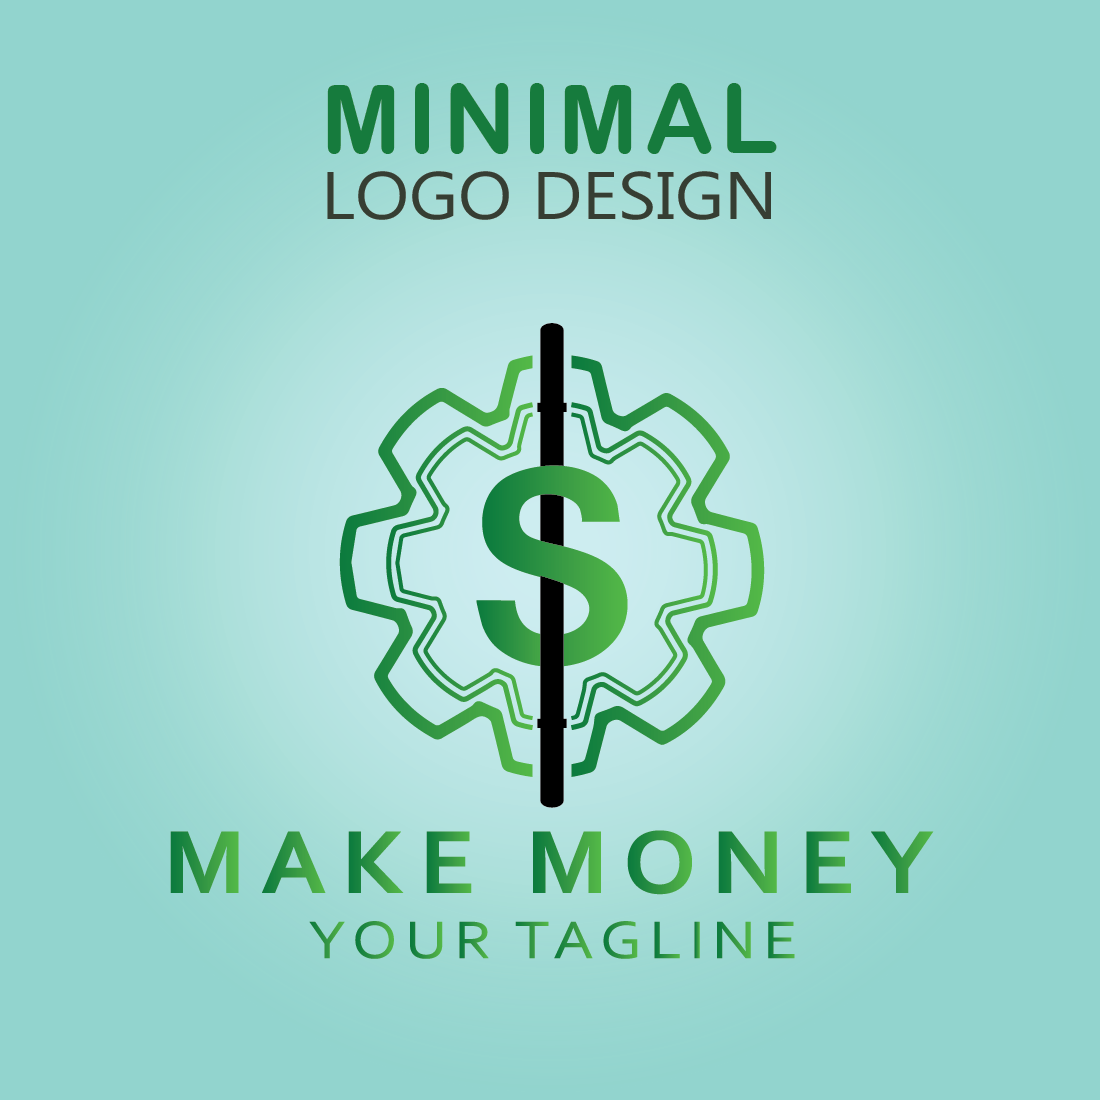 vector dollar and money logo template design || unique Make money logo template design for business cover image.